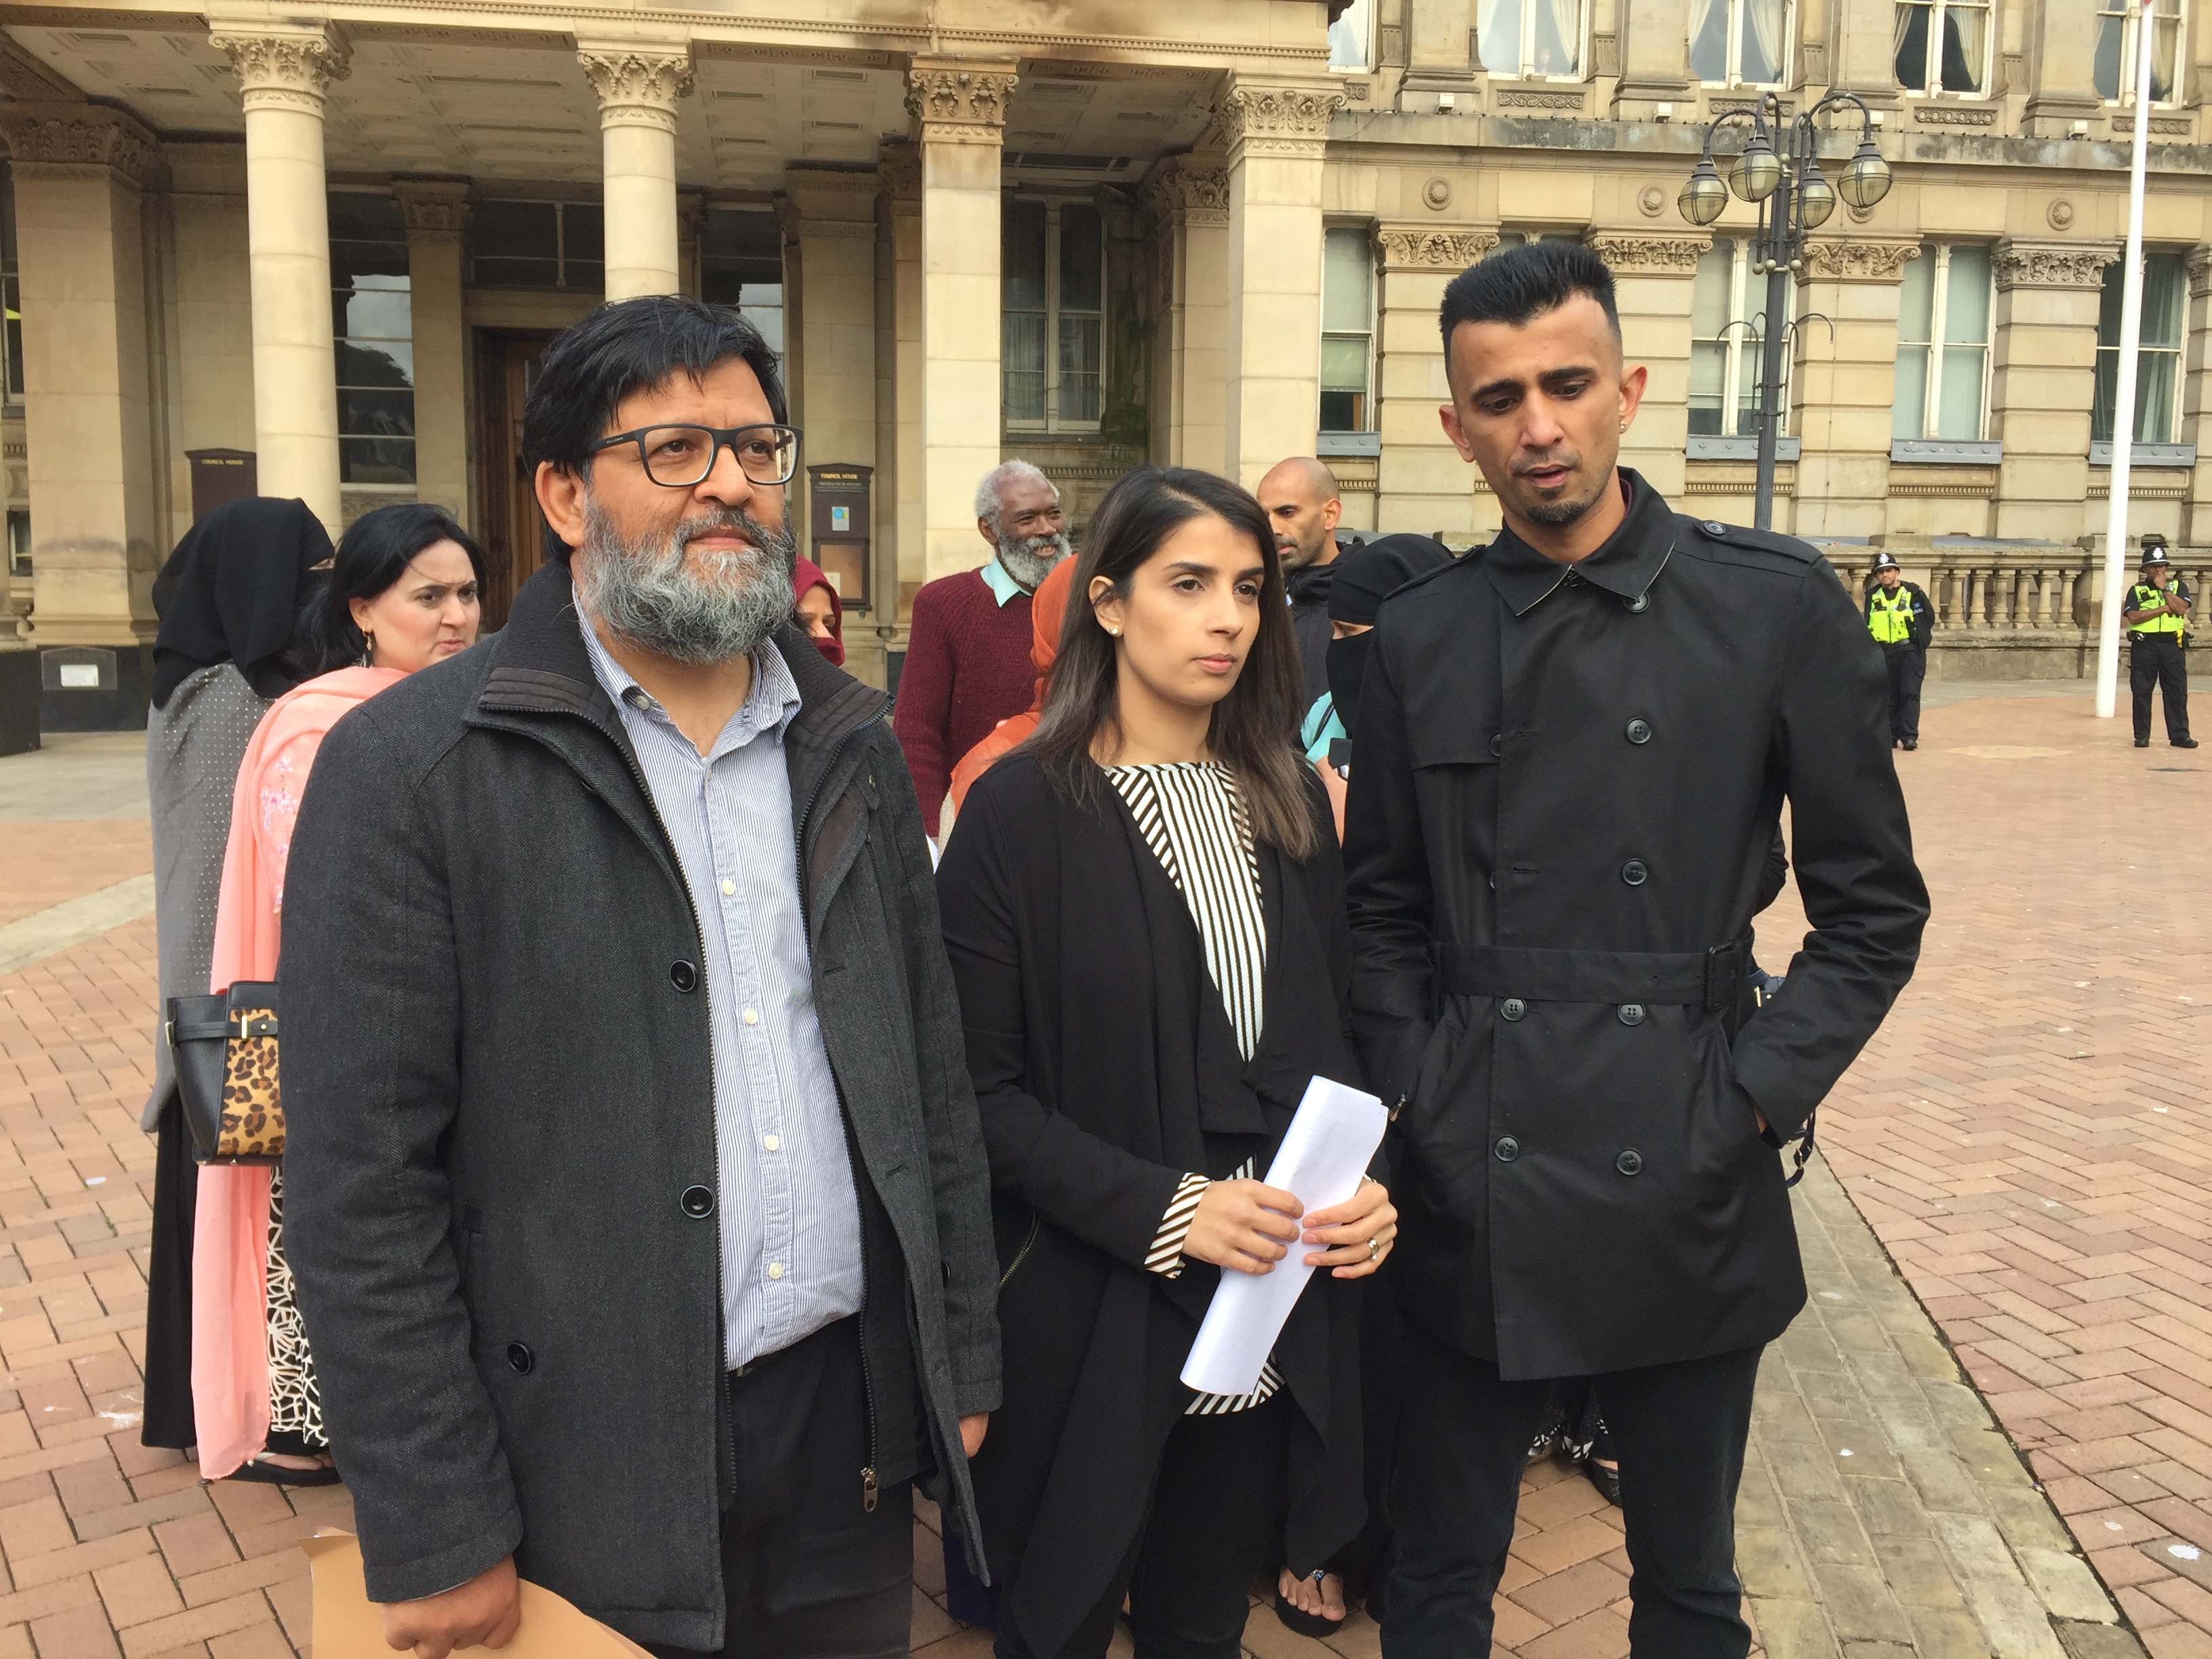 Protest organisers, Amir Ahmed, Rosina Afsar, and Shakeel Afsar